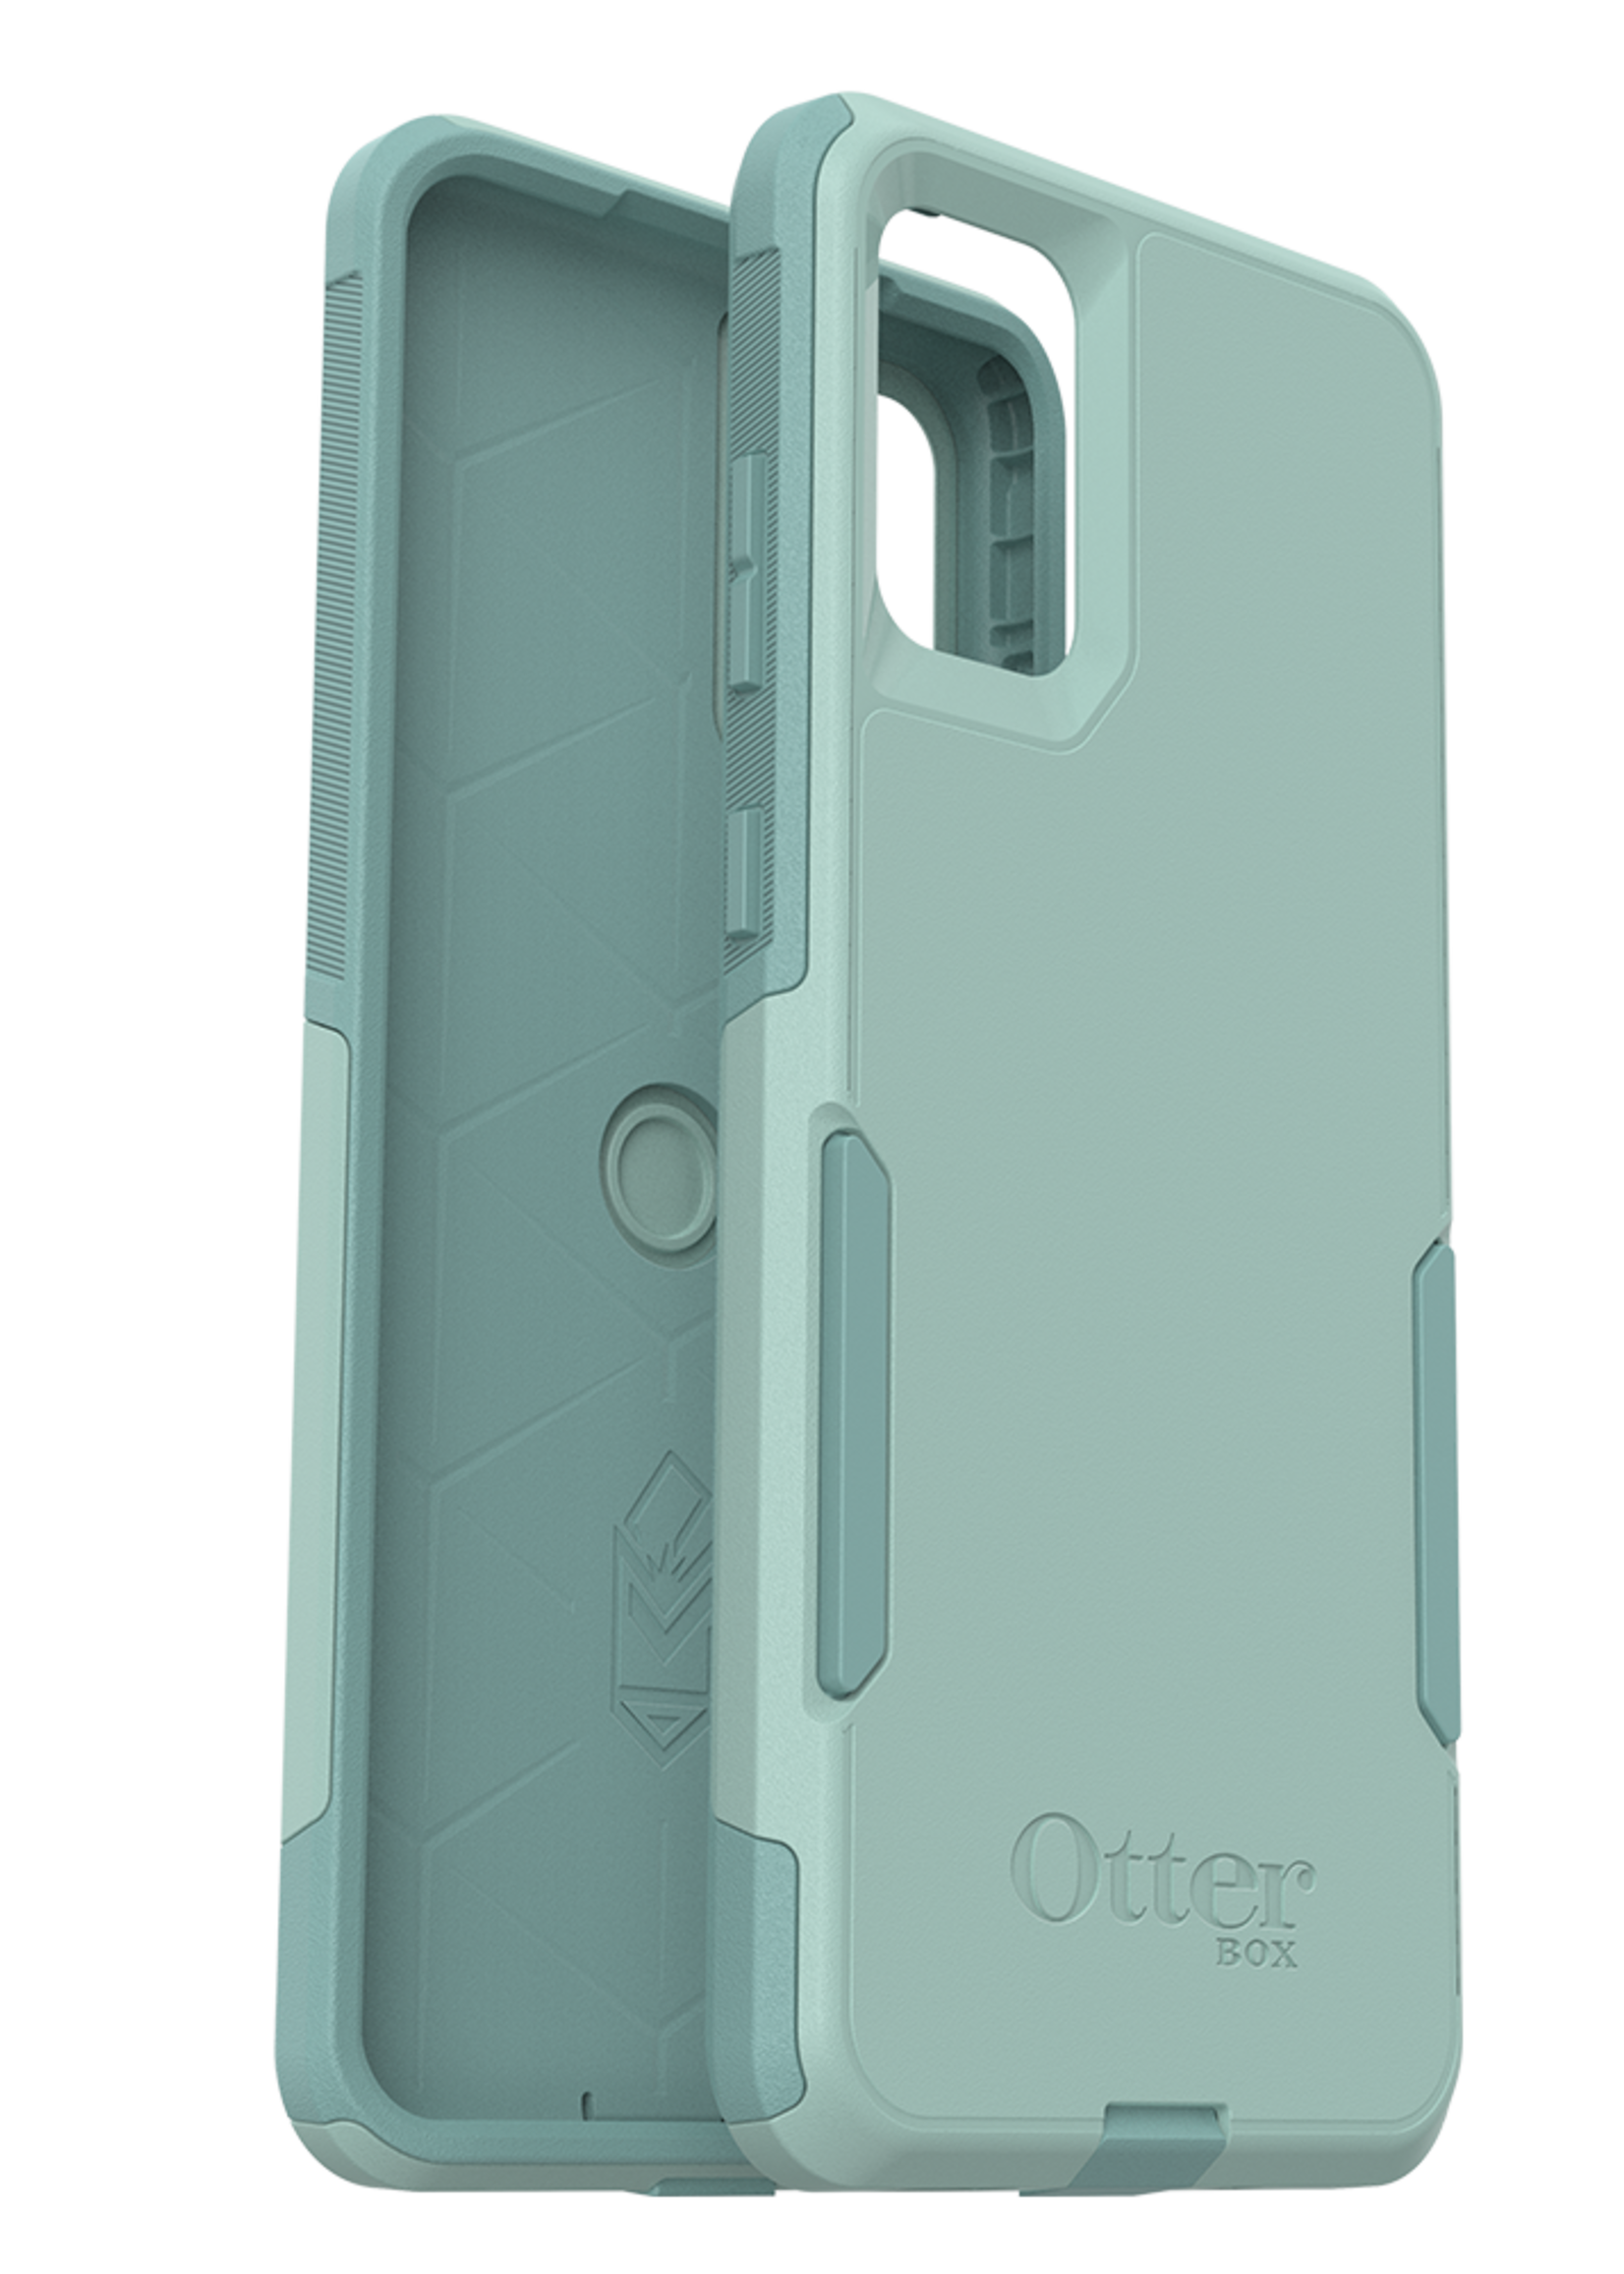 Otterbox OtterBox - Commuter Case for Samsung Galaxy S20 Plus - Mint Way